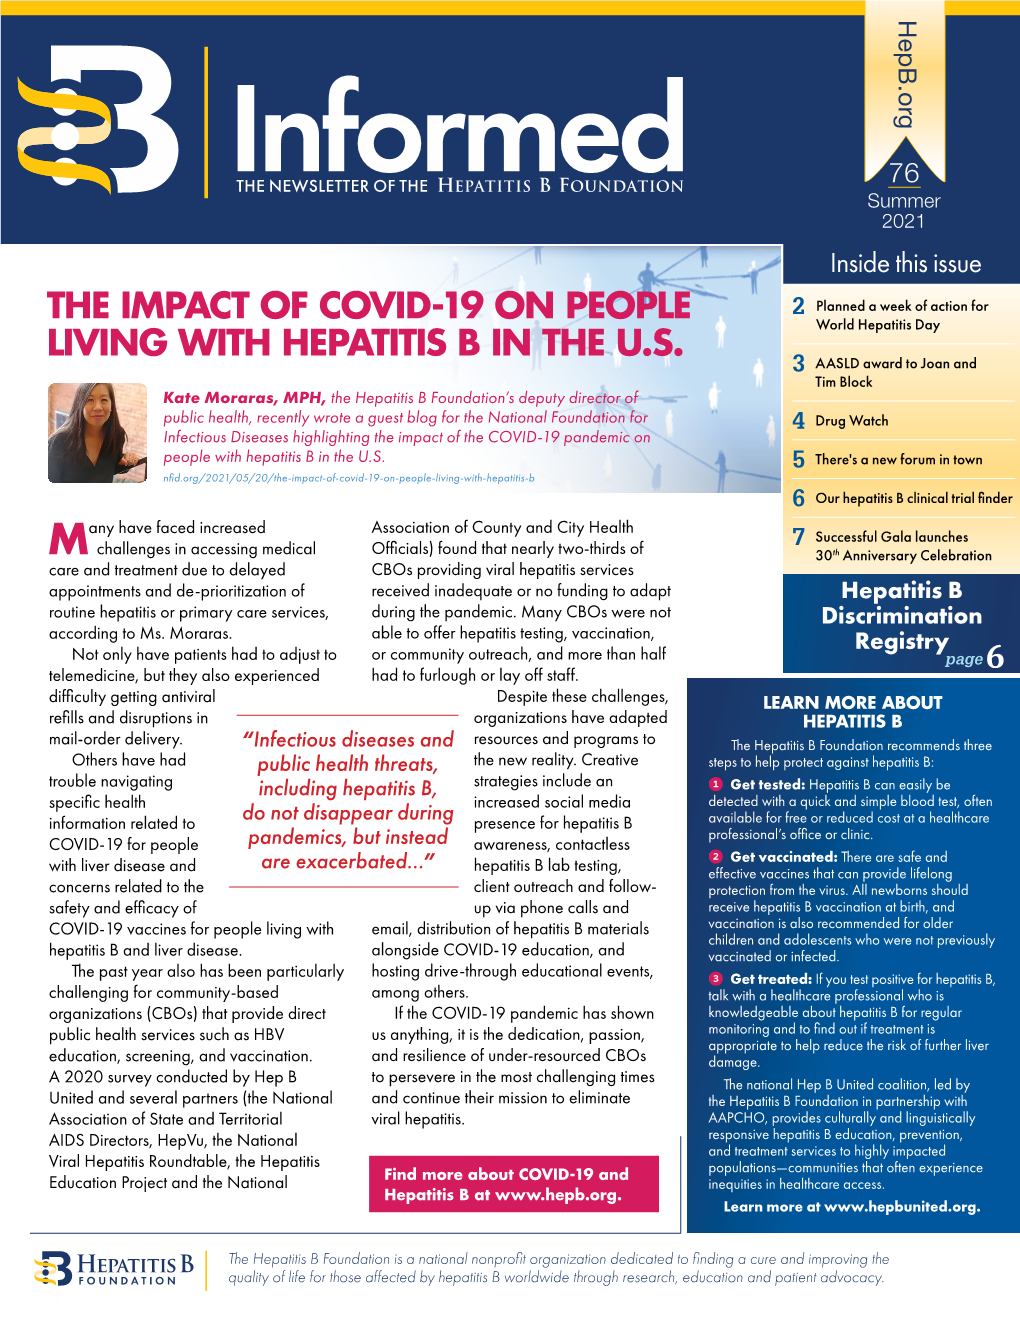 The Impact of Covid-19 on People Living with Hepatitis